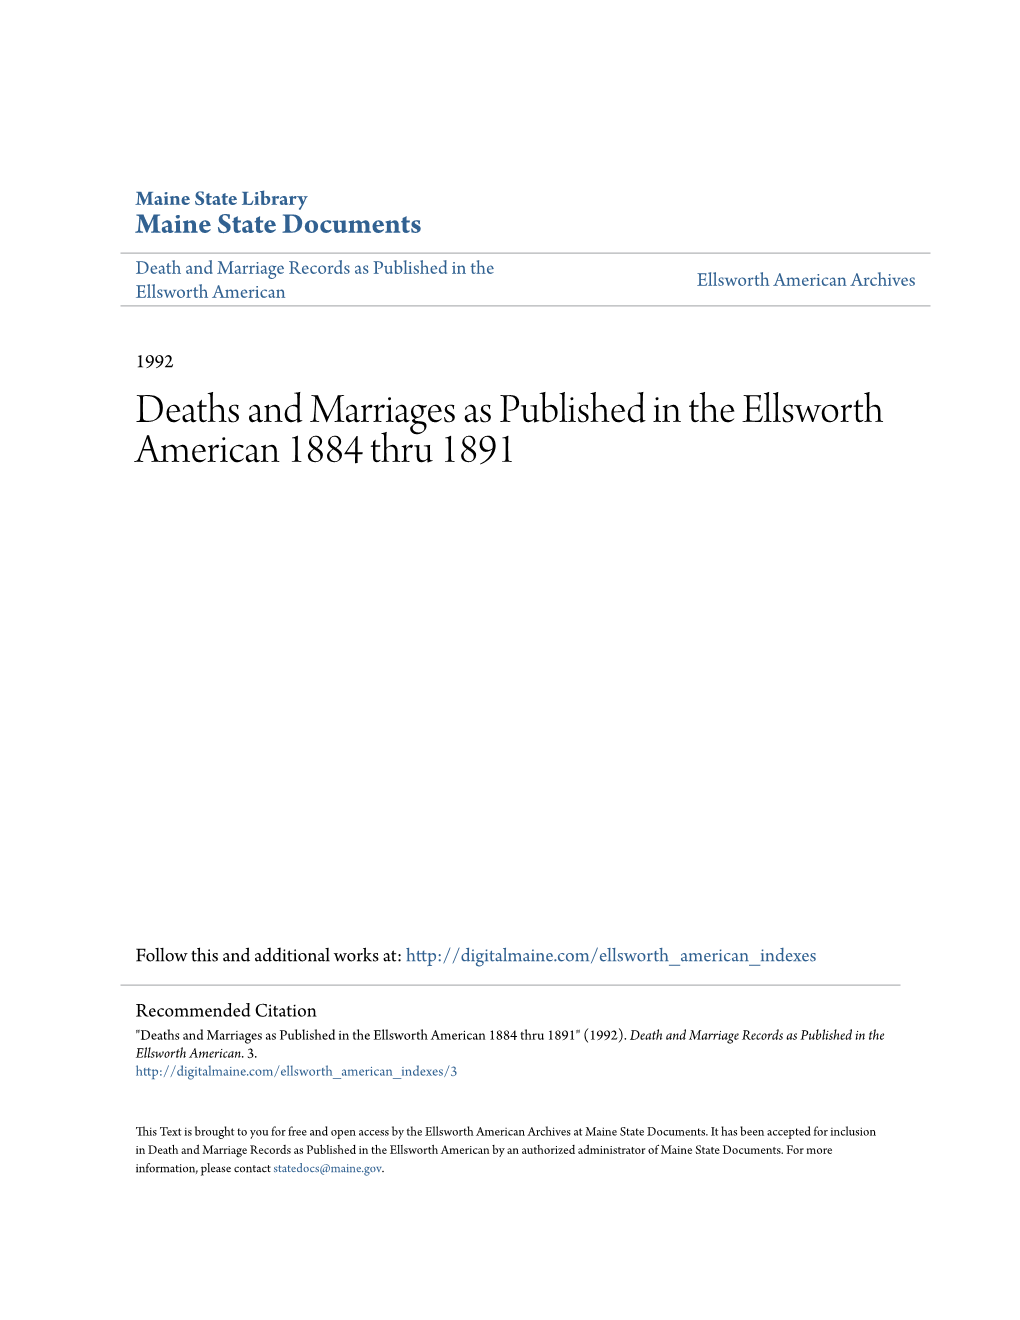 Deaths and Marriages As Published in the Ellsworth American 1884 Thru 1891